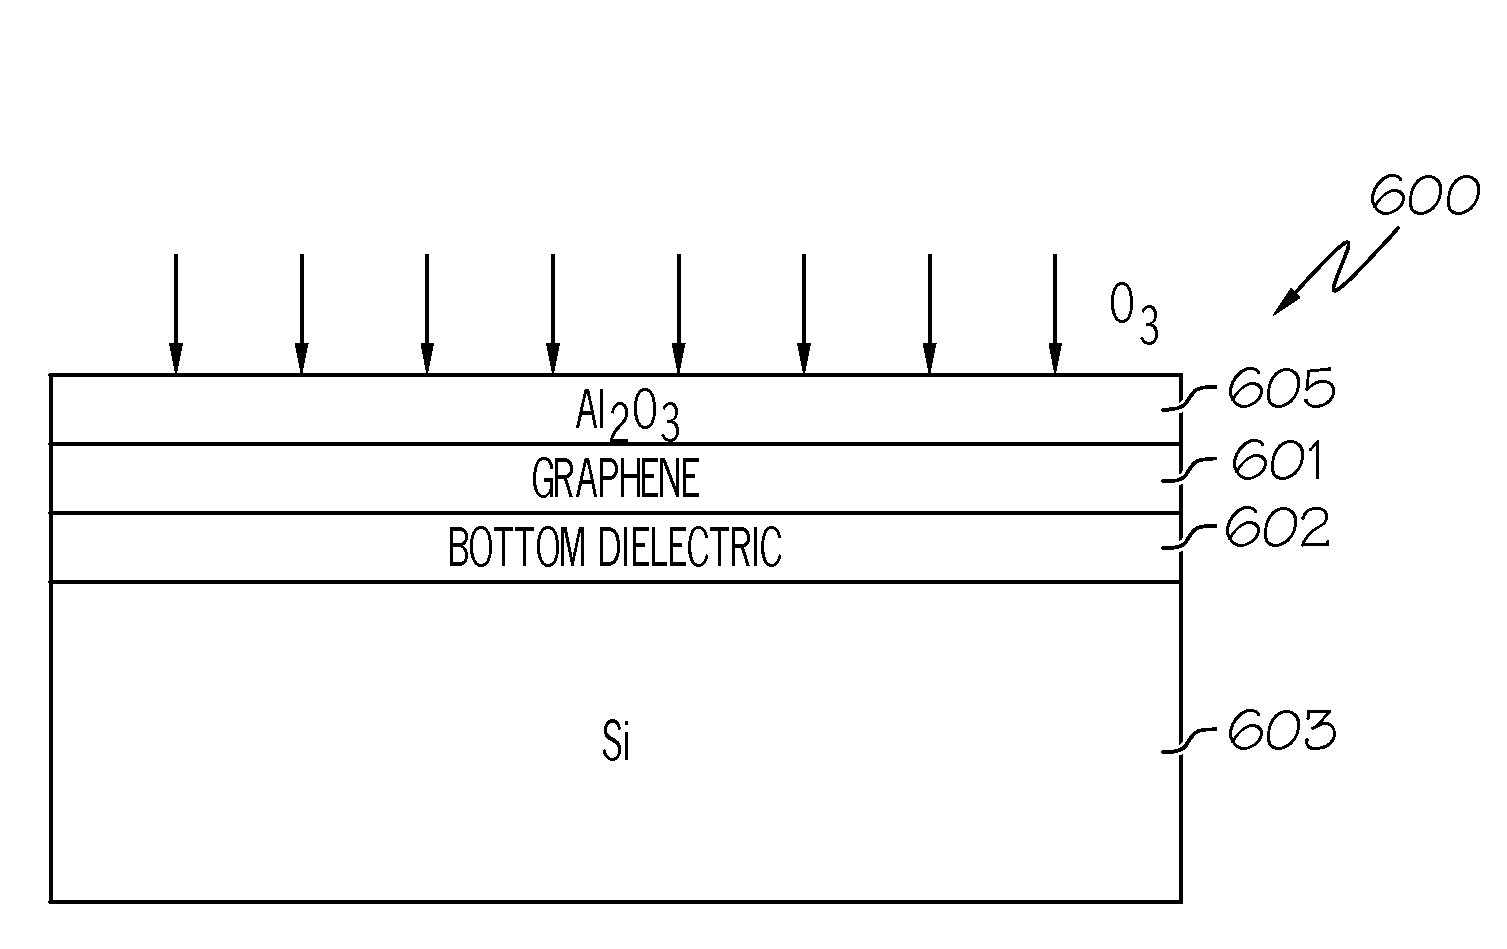 Establishing a uniformly thin dielectric layer on graphene in a semiconductor device without affecting the properties of graphene